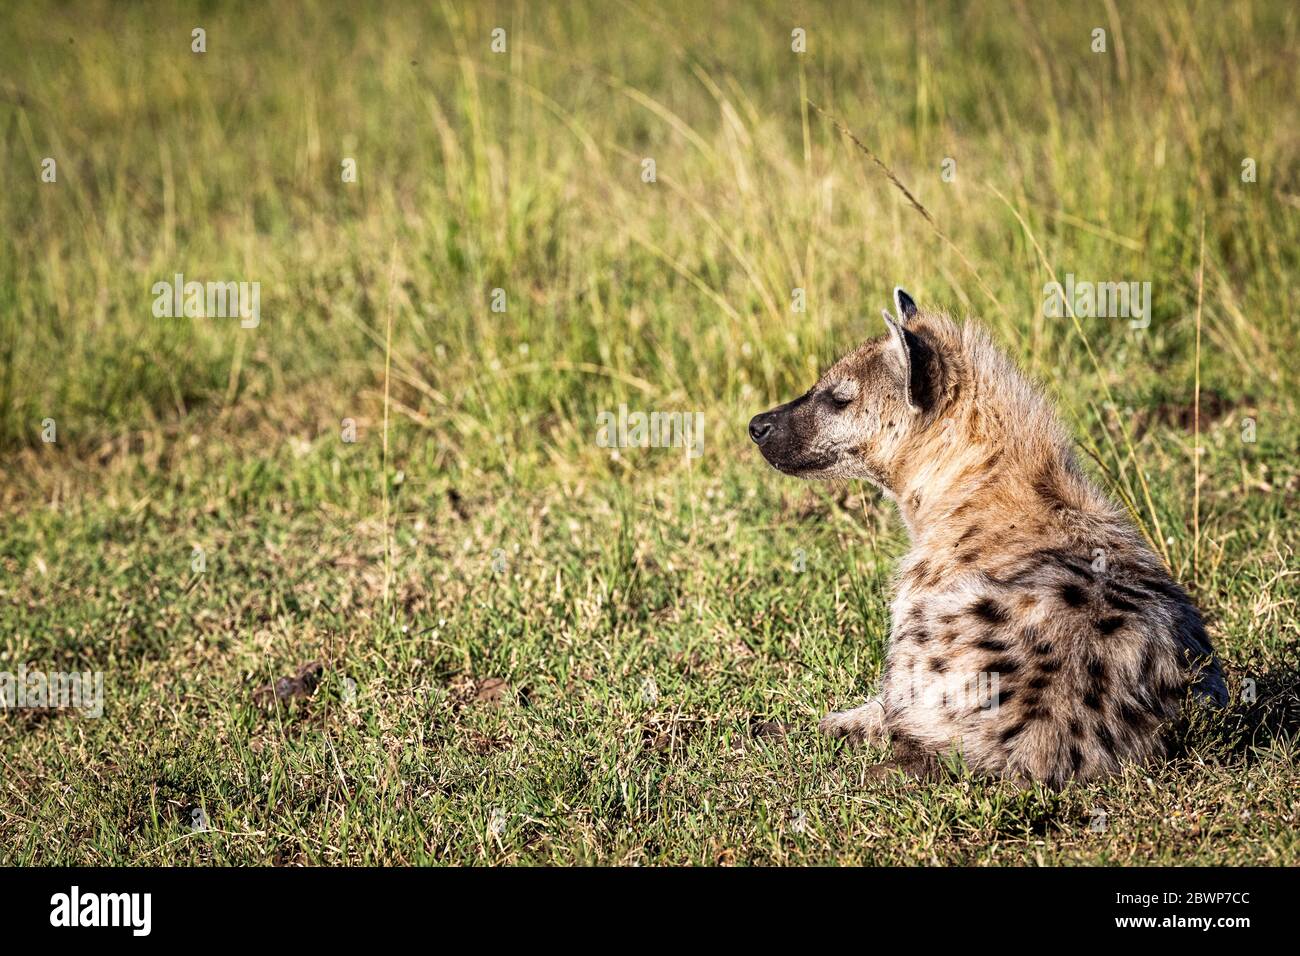 Hyena lying down in grass of Kenya Africa with copy space Stock Photo